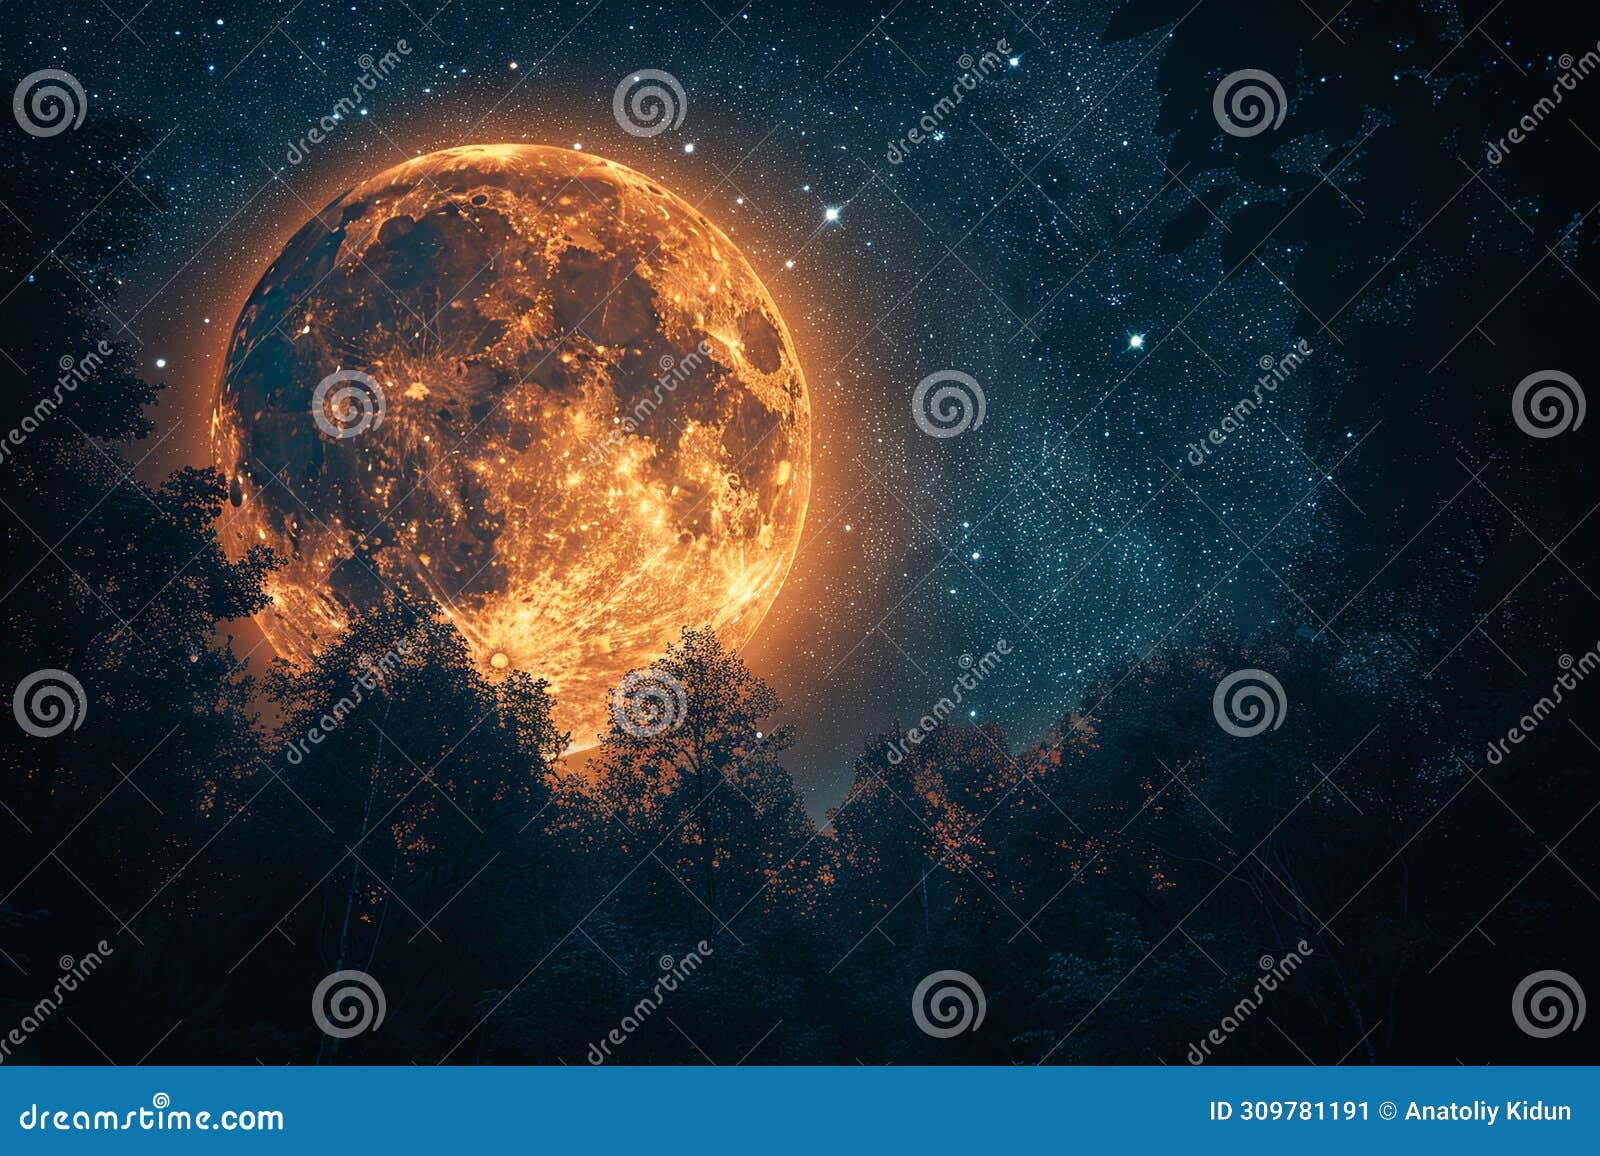 moonrise sky, stars, milky and trees, in the style of spectacular backdrops, realistic usage of light and color